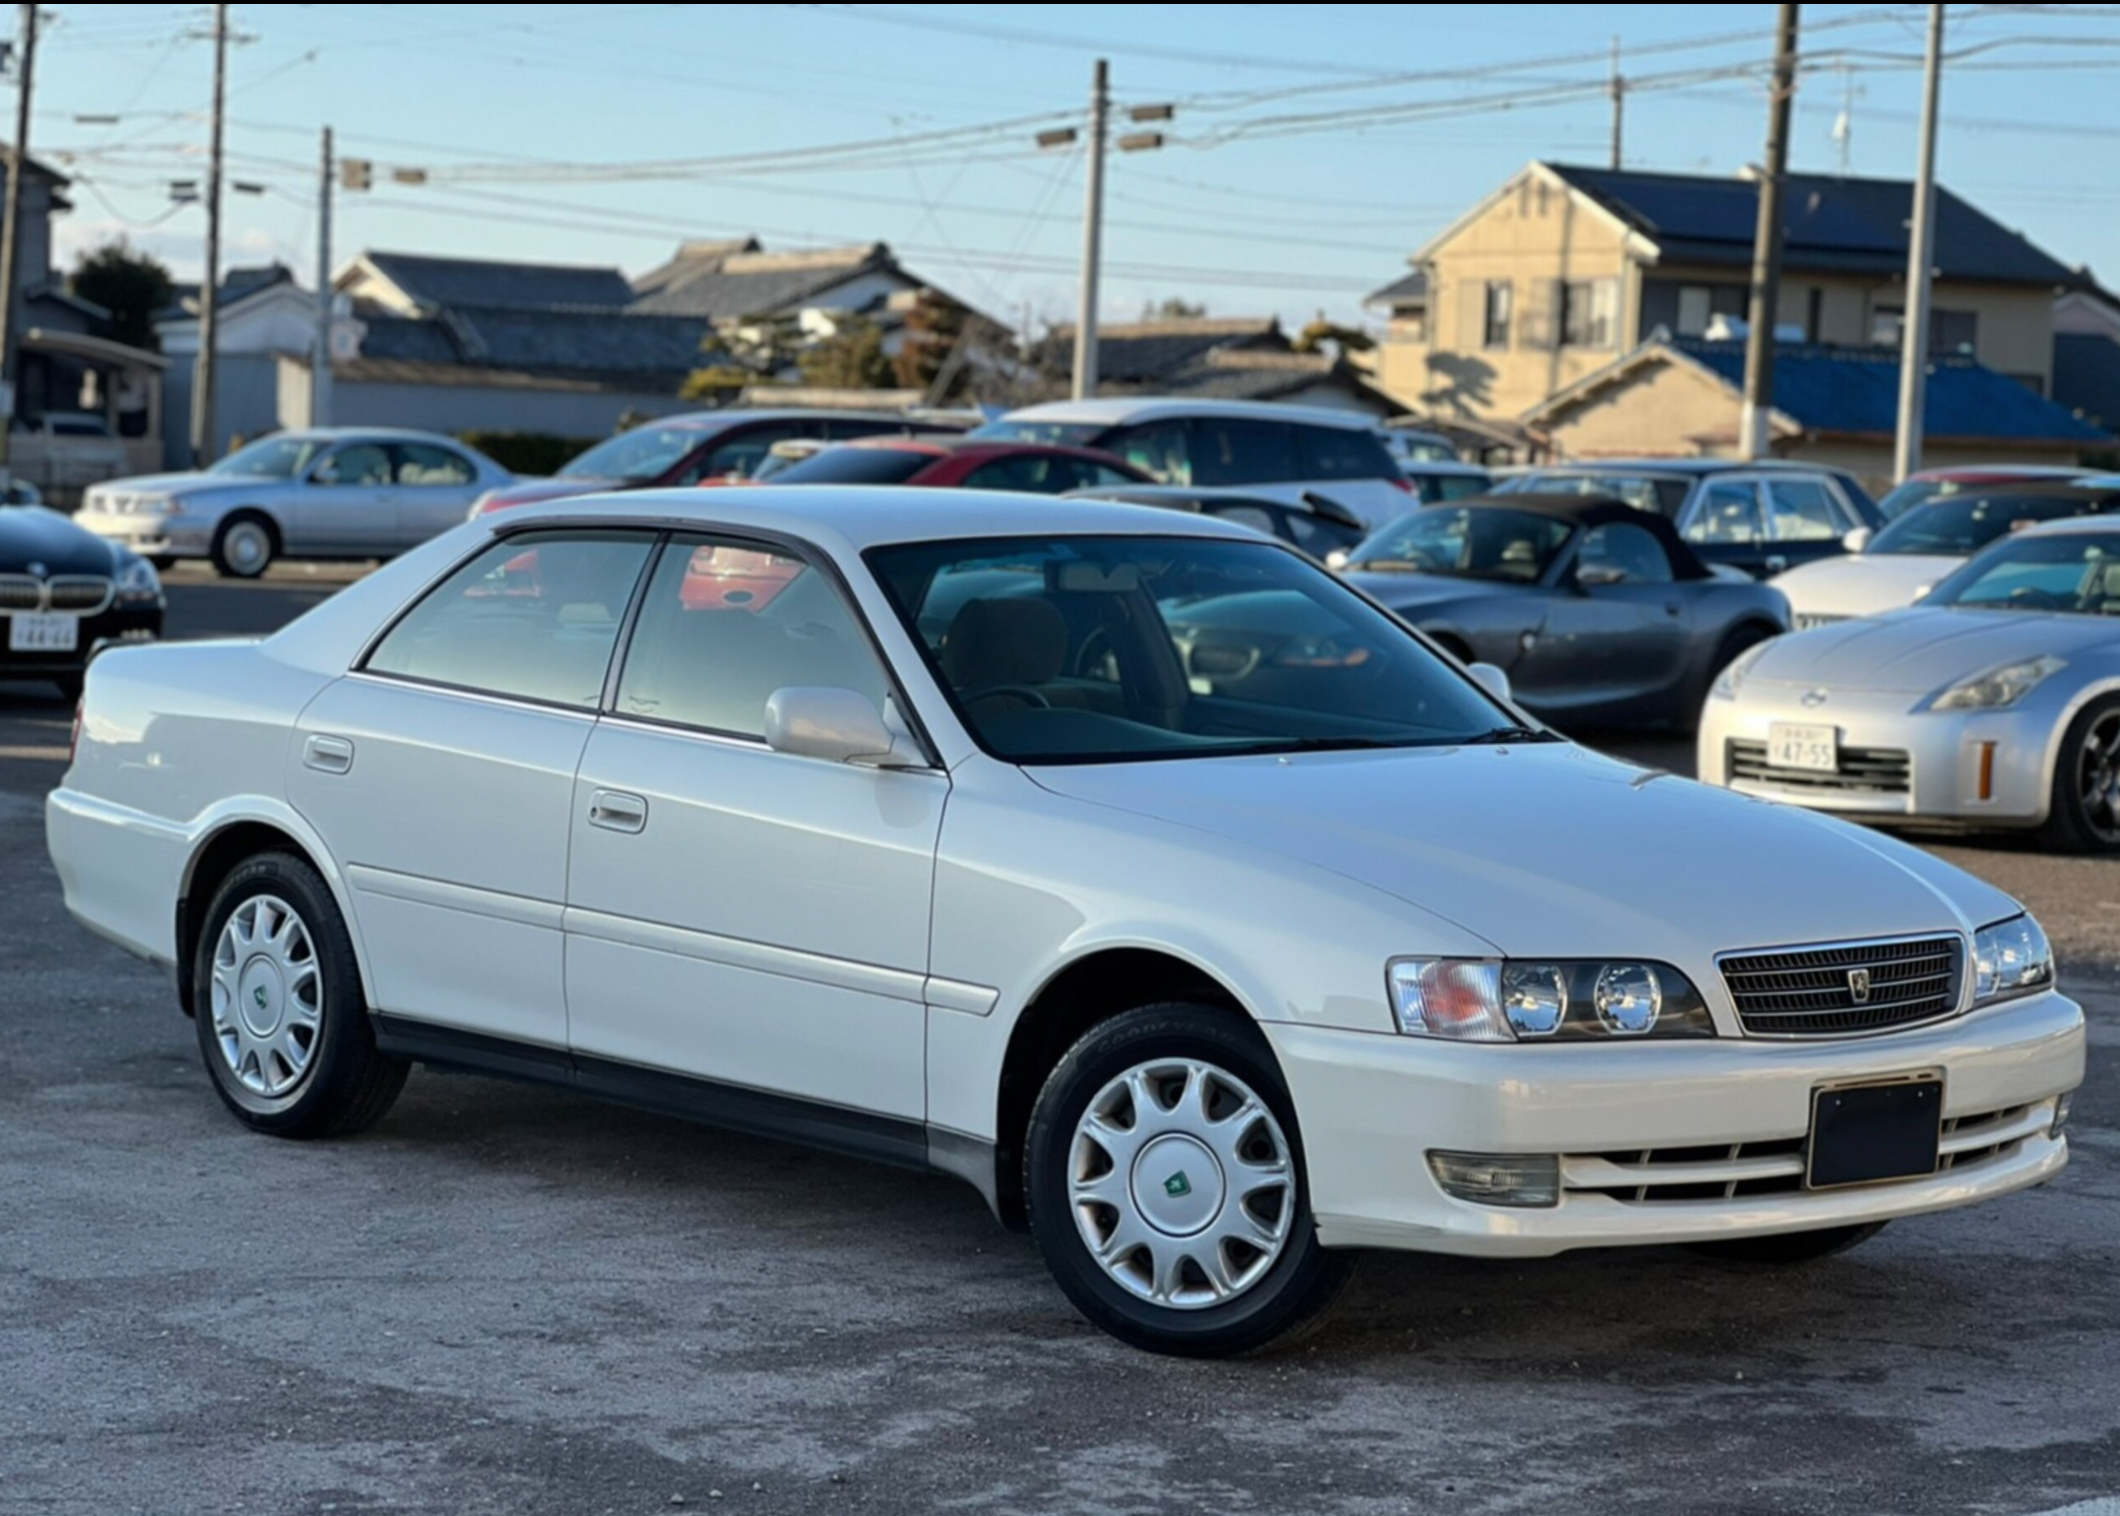 1997 Toyota Chaser JZX100 - COMING SOON